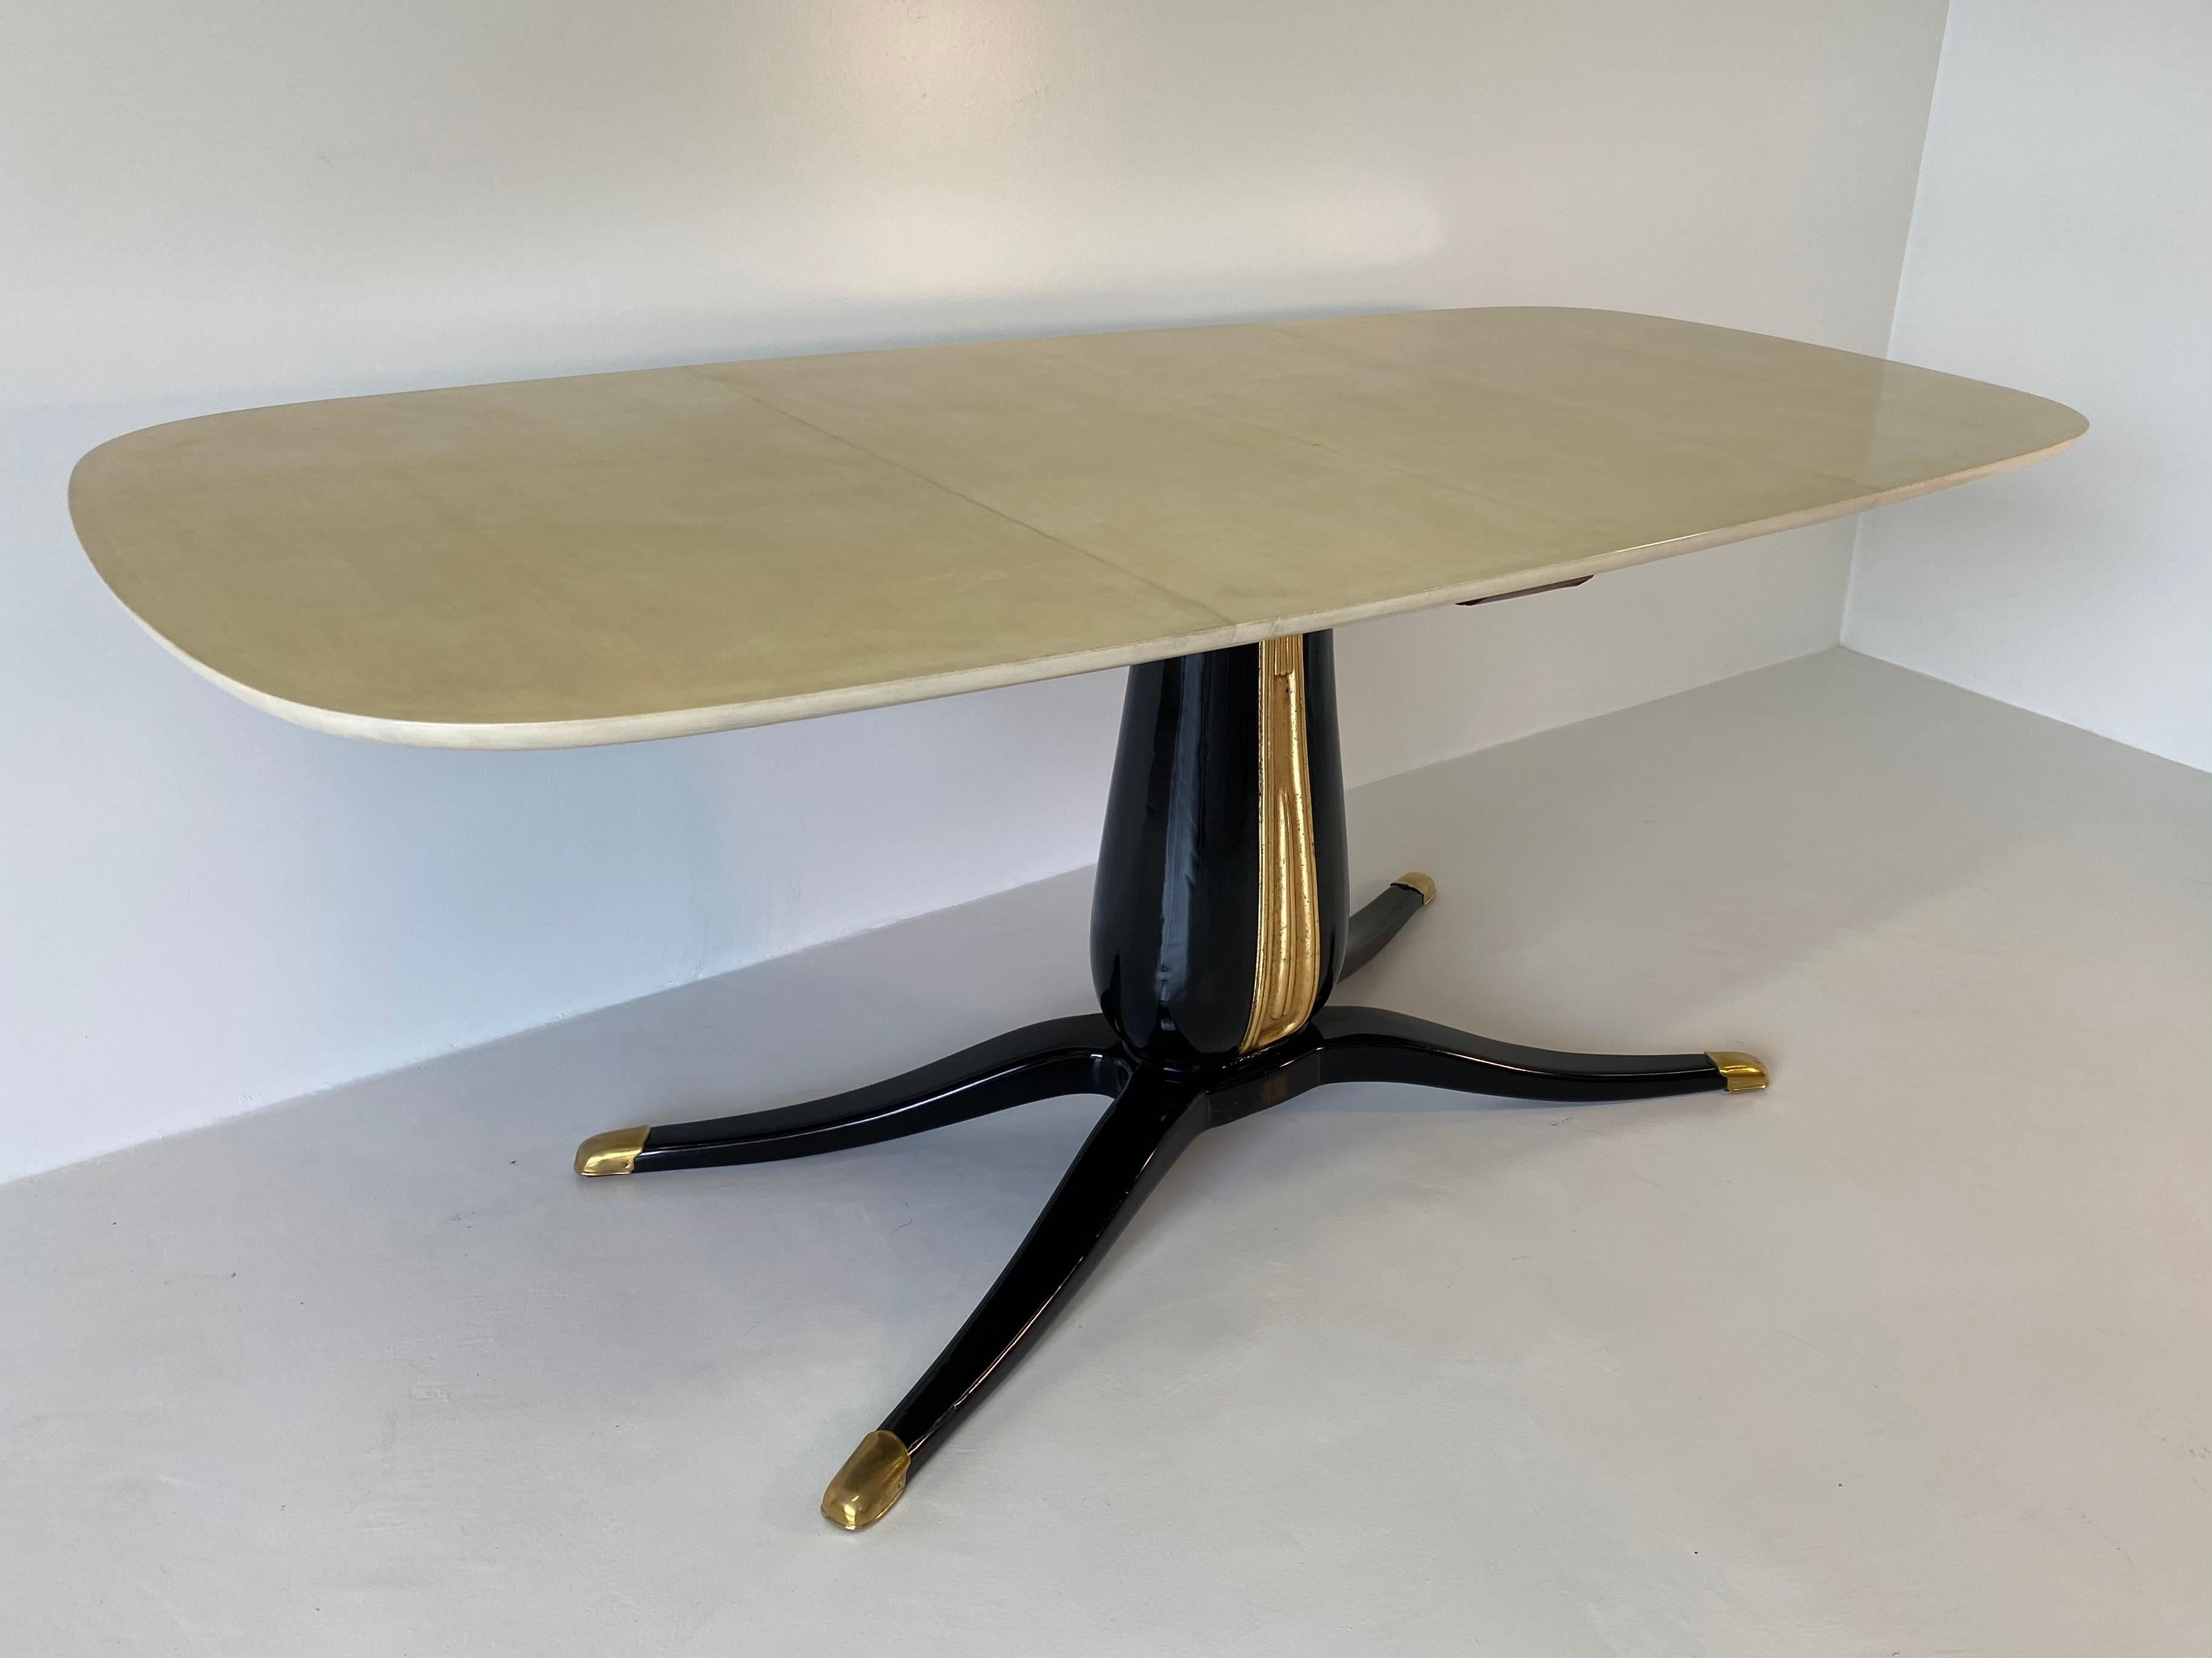 This table was produced in the 1950s in Italy attributed to Osvaldo Borsani.
The top is completely covered with fine parchment while the base is black lacquered with the central part in gold leaf.
The tips of the legs are made of